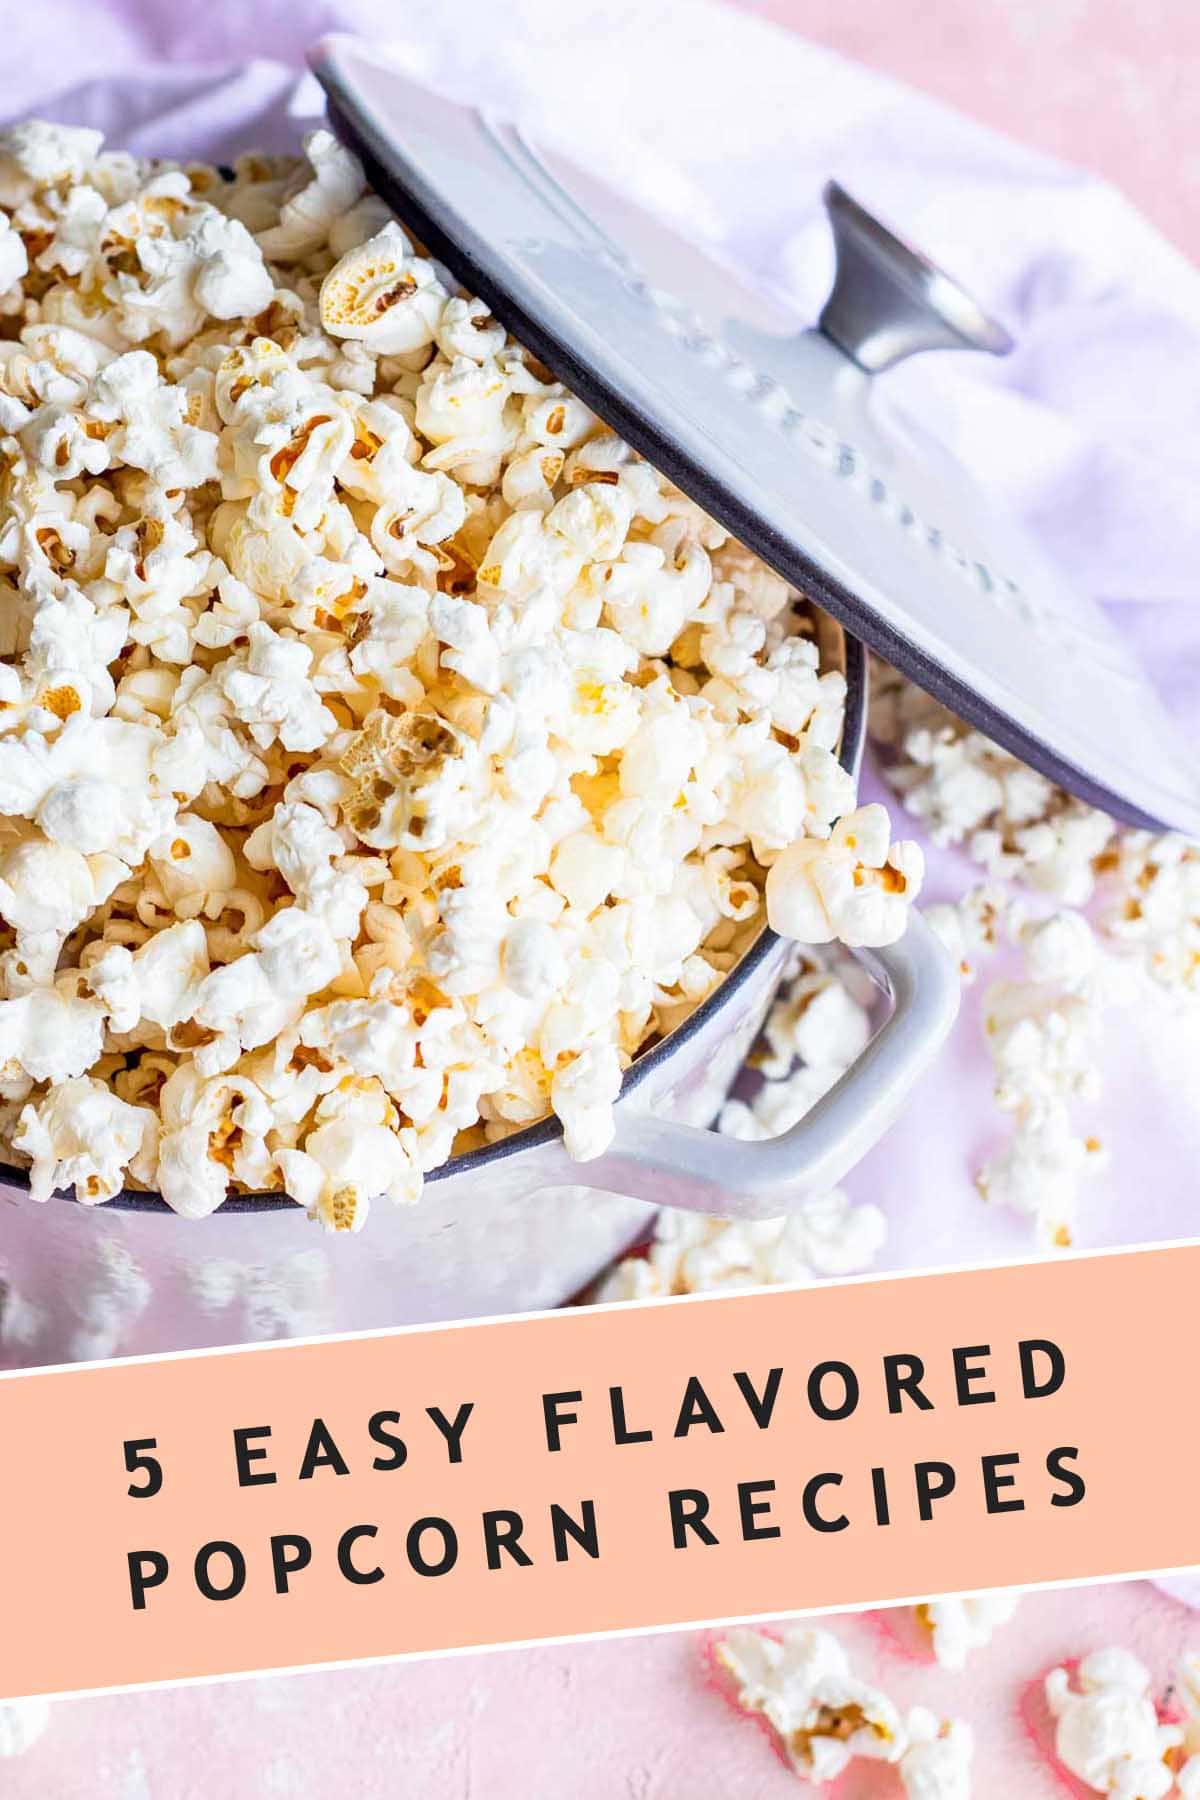 photo of 5 easy flavored popcorn recipes graphic image